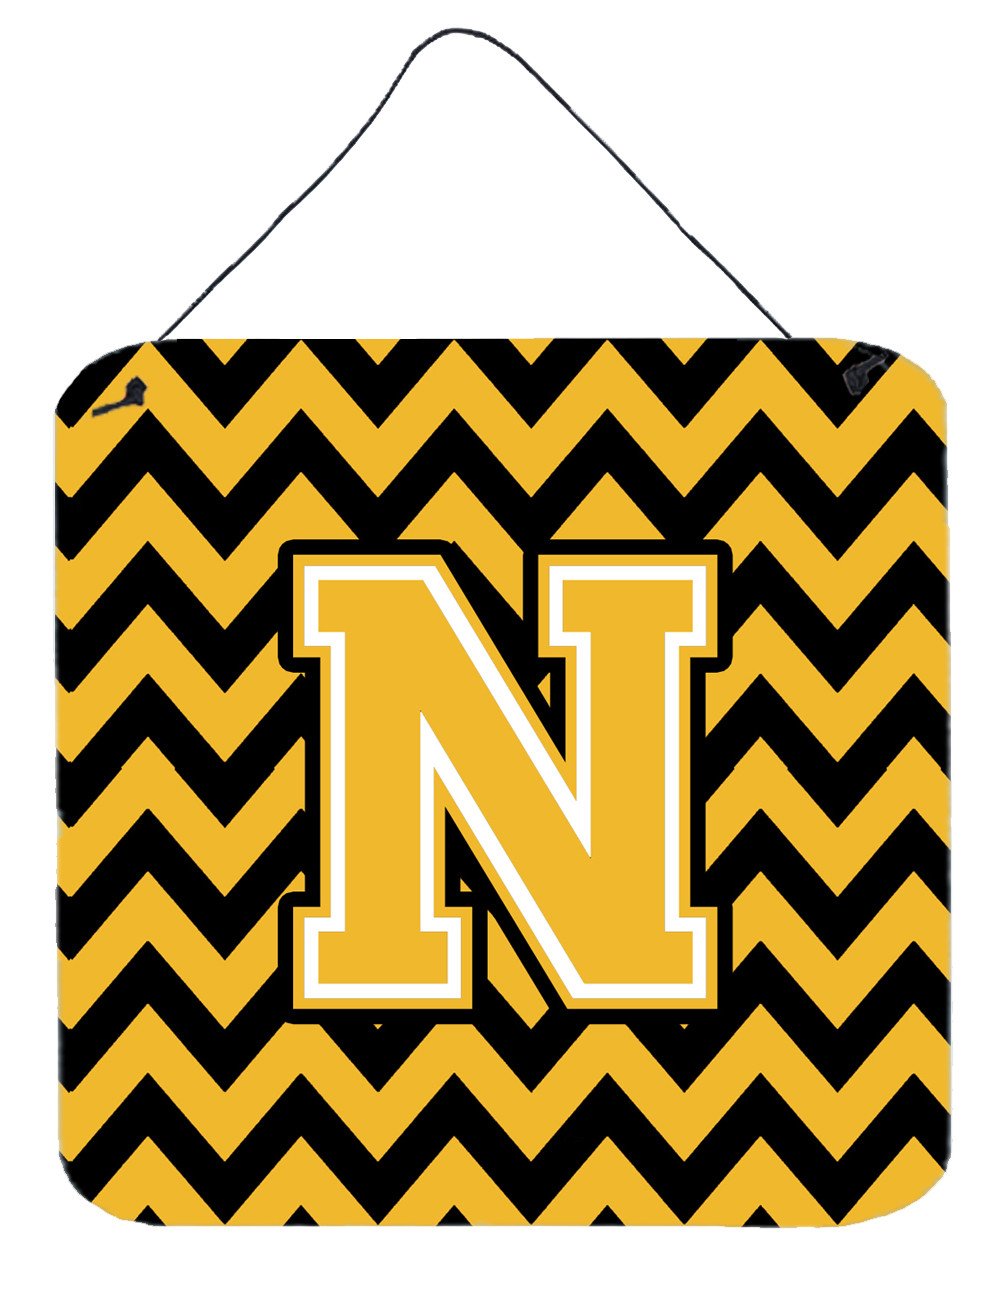 Letter N Chevron Black and Gold Wall or Door Hanging Prints CJ1053-NDS66 by Caroline's Treasures